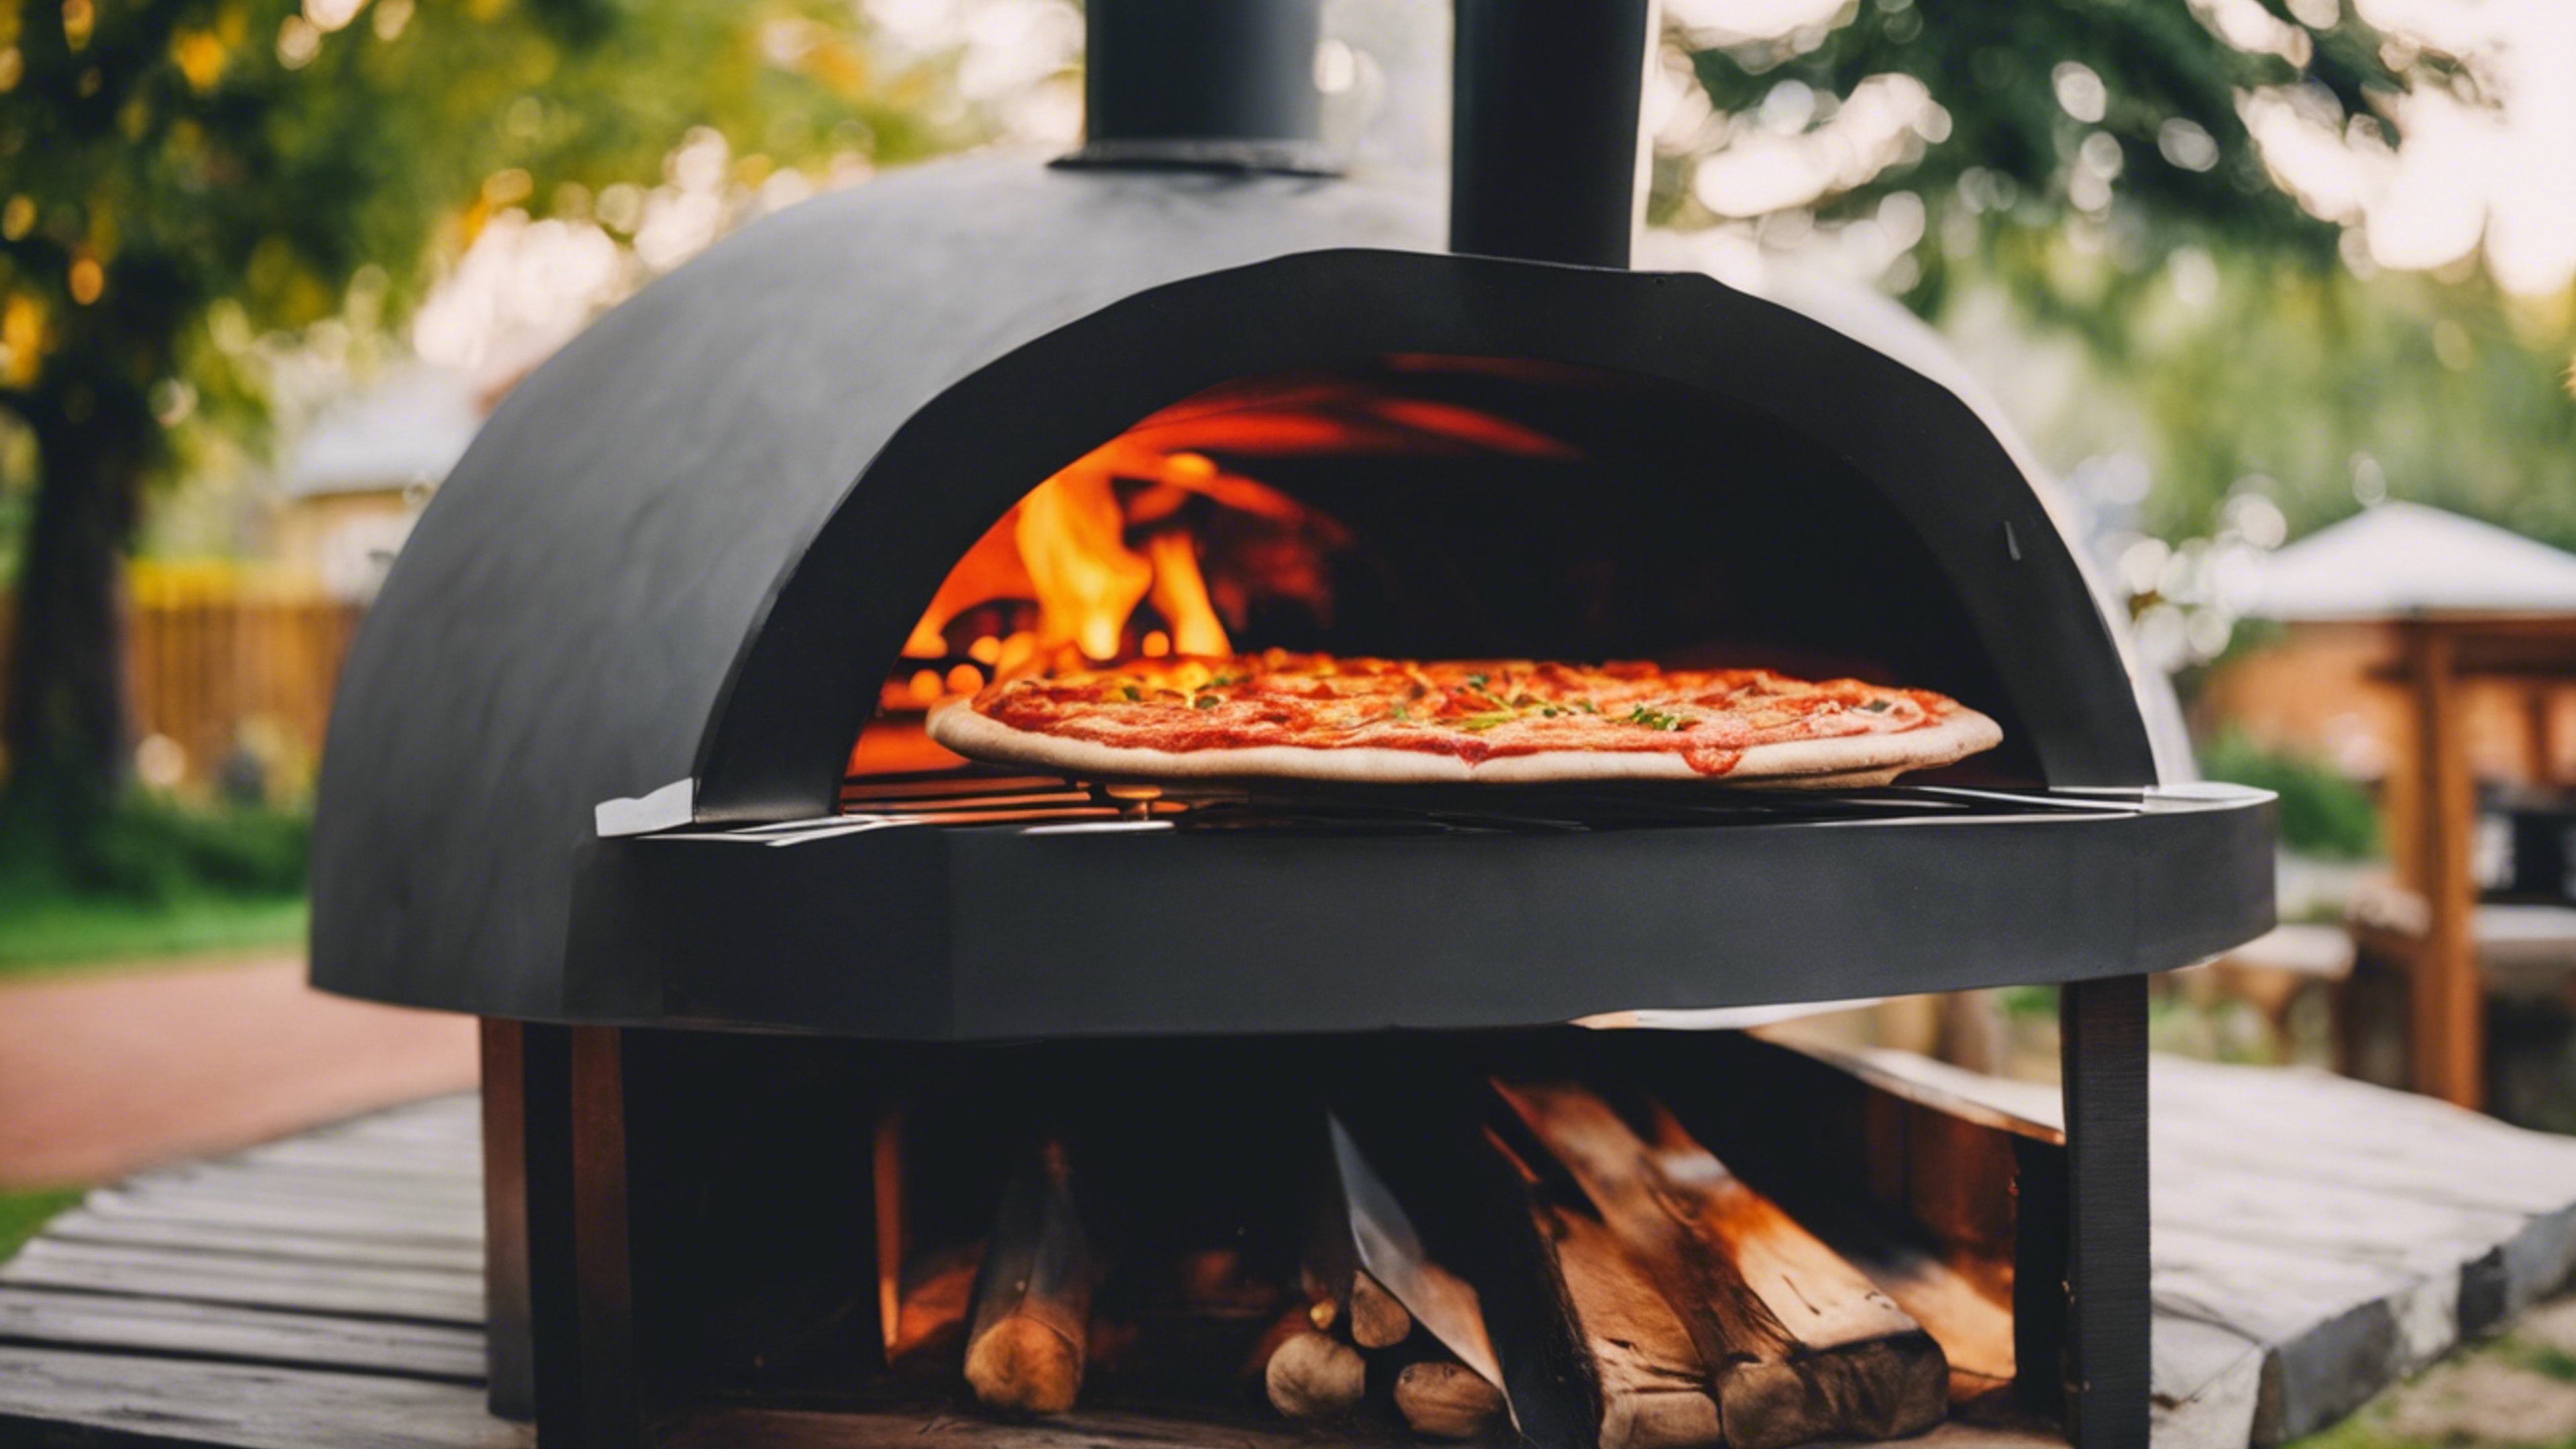 A traditional wood-fired pizza oven in the backyard of a suburban house.壁紙[75feb758a4e8473d8787]